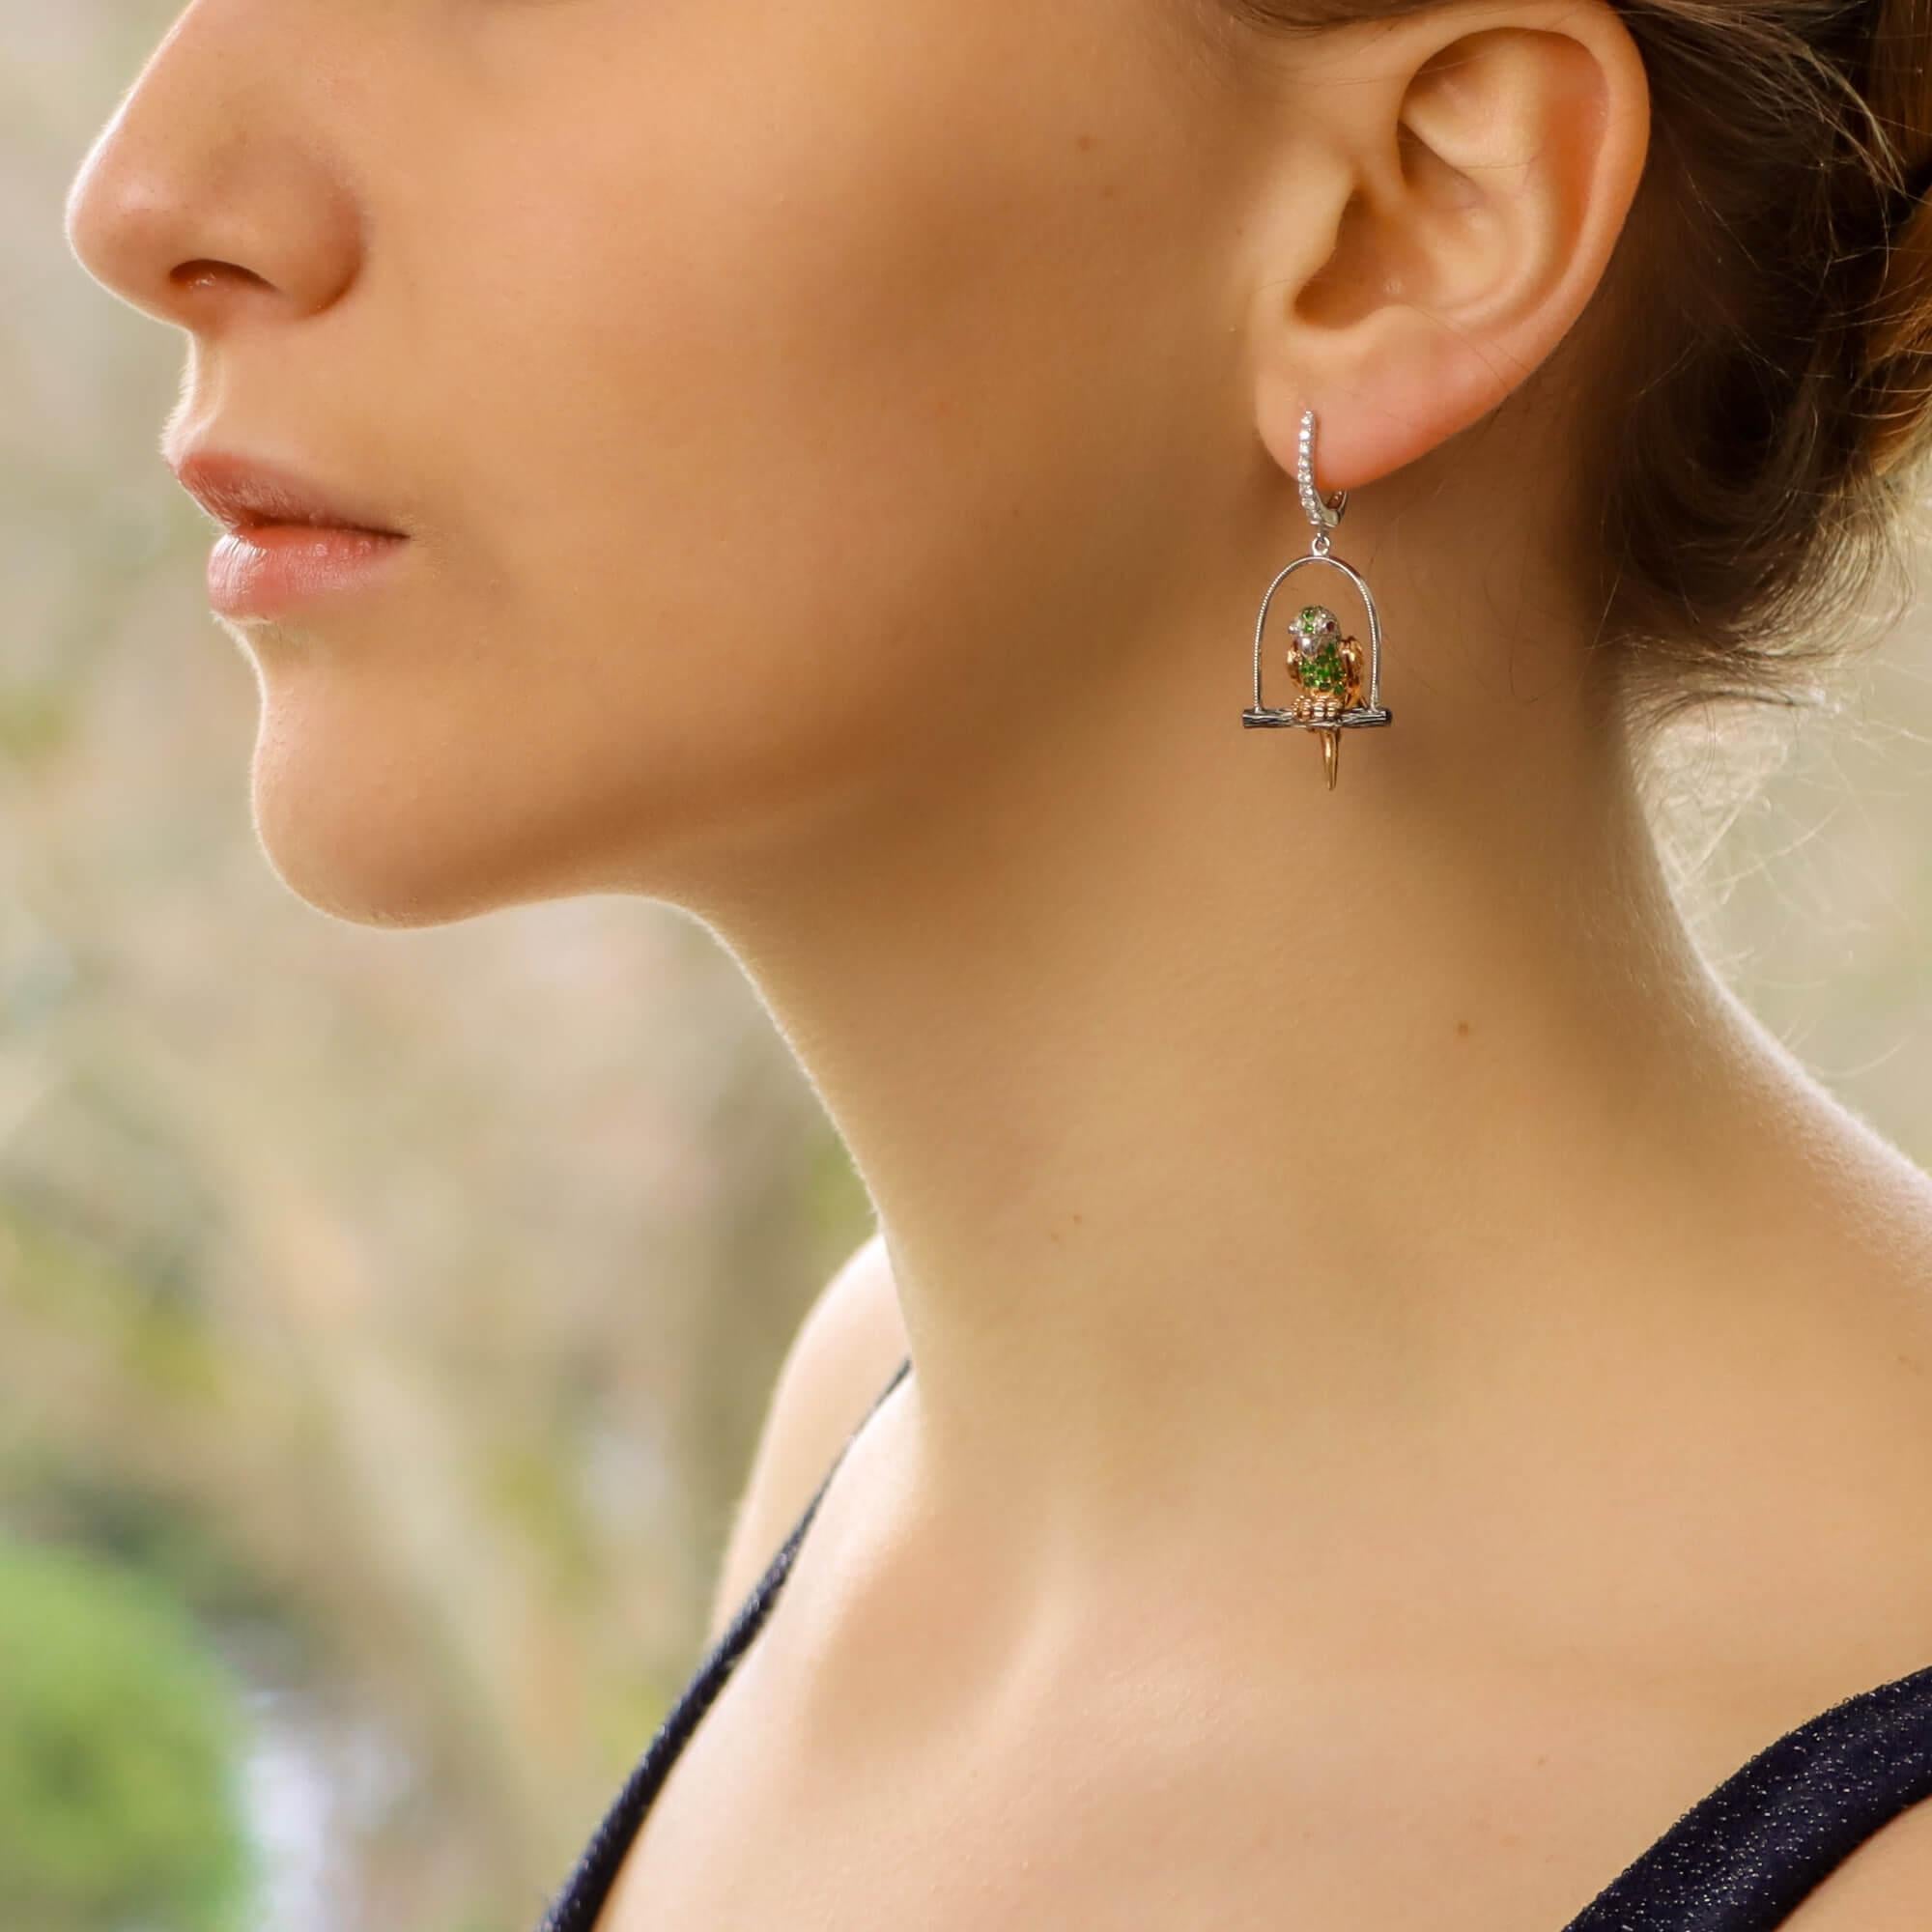 A beautiful pair of modern parrot earrings set on 18k white gold.

Each parrot is perched on a white gold swing roost and is grain set with round blue, pink, orange and yellow sapphires, rubies, tsavorite garnets and diamonds across its body, wings